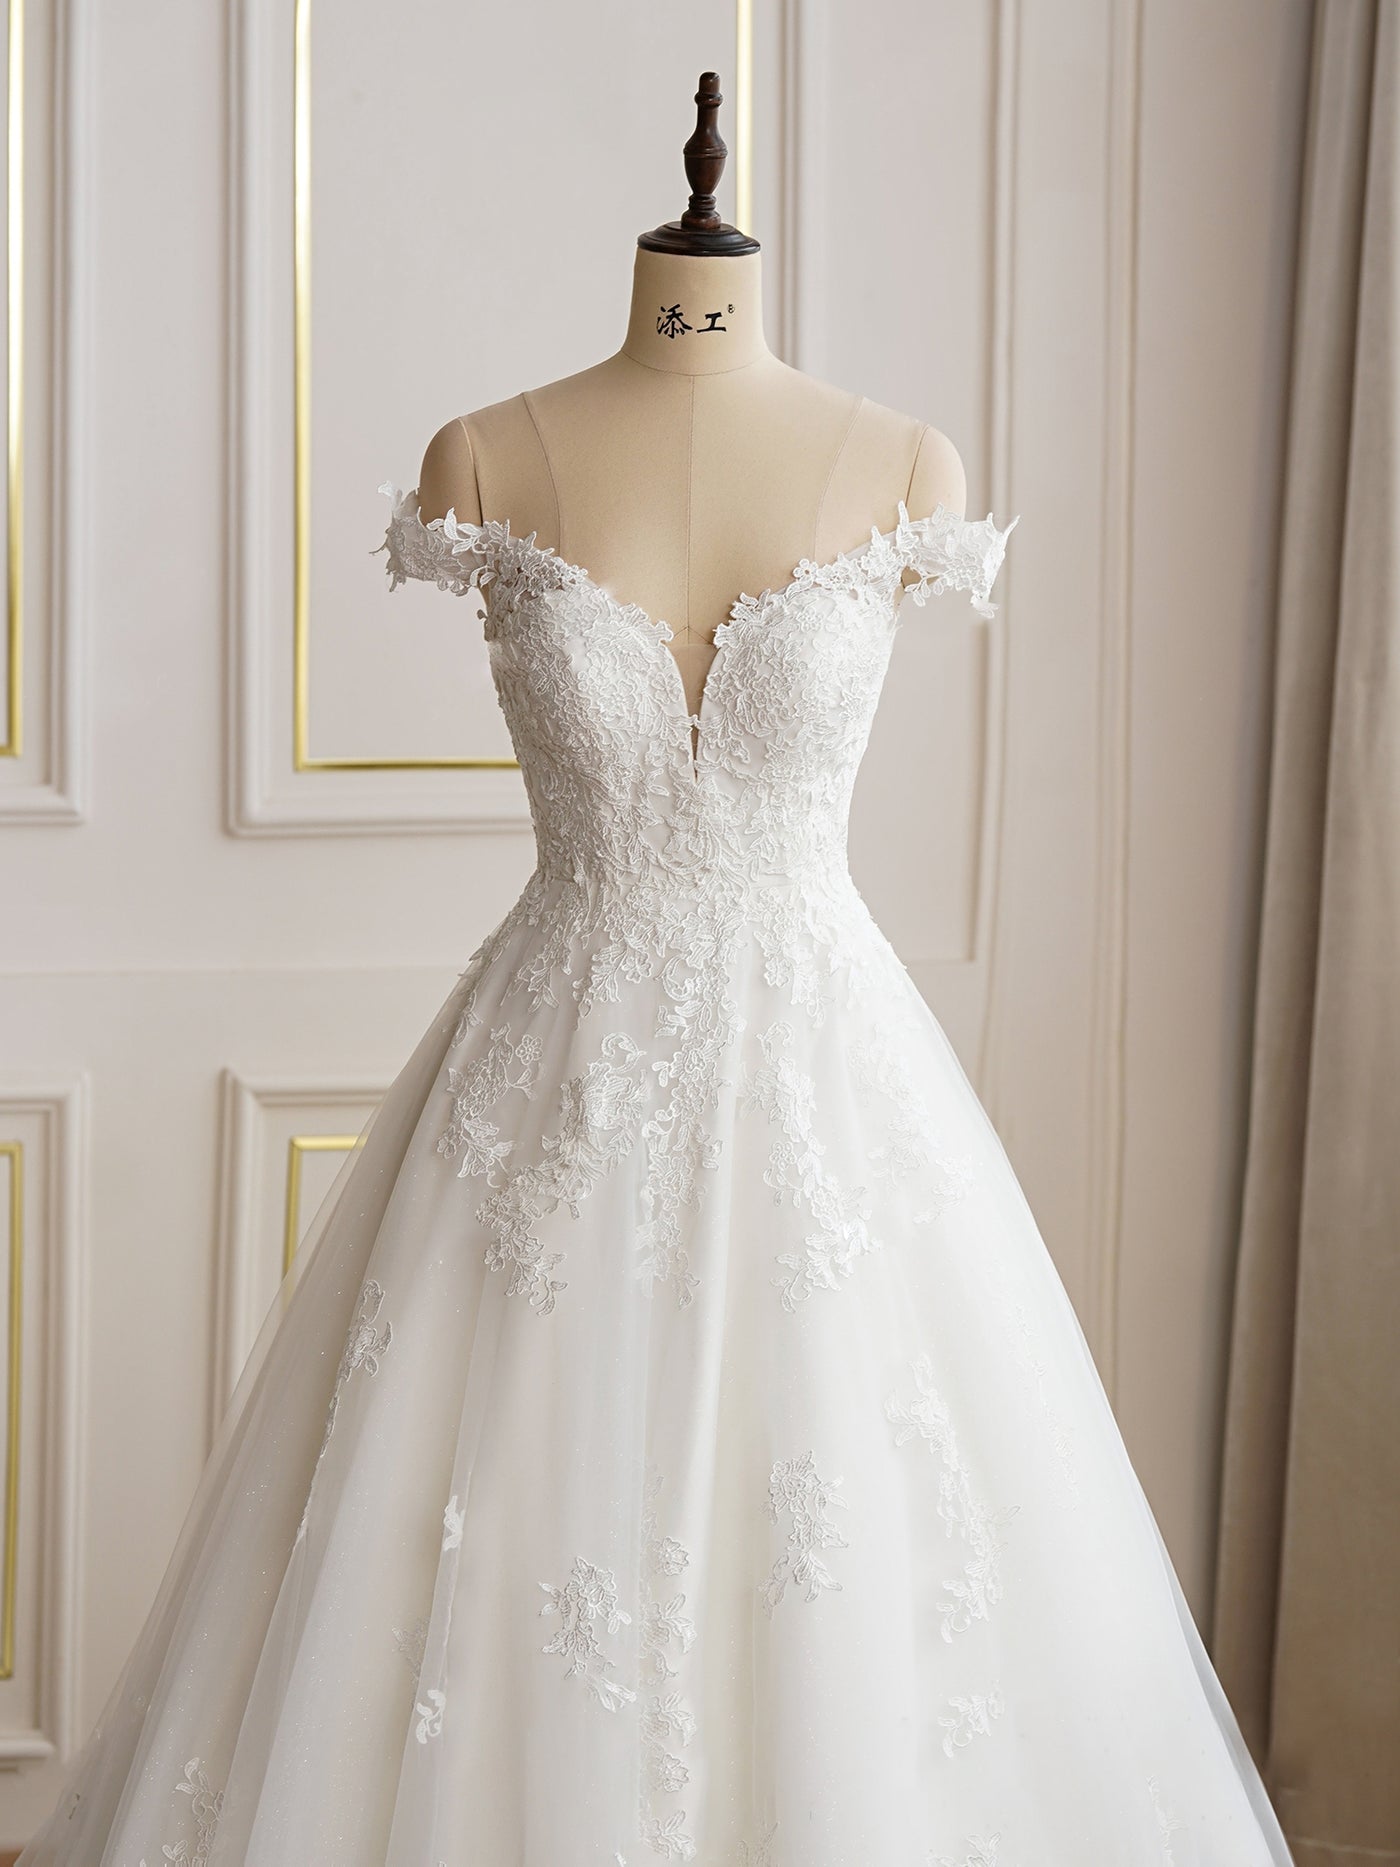 Elegant Lace A-line Wedding Dress With Off the Shoulder Sleeves